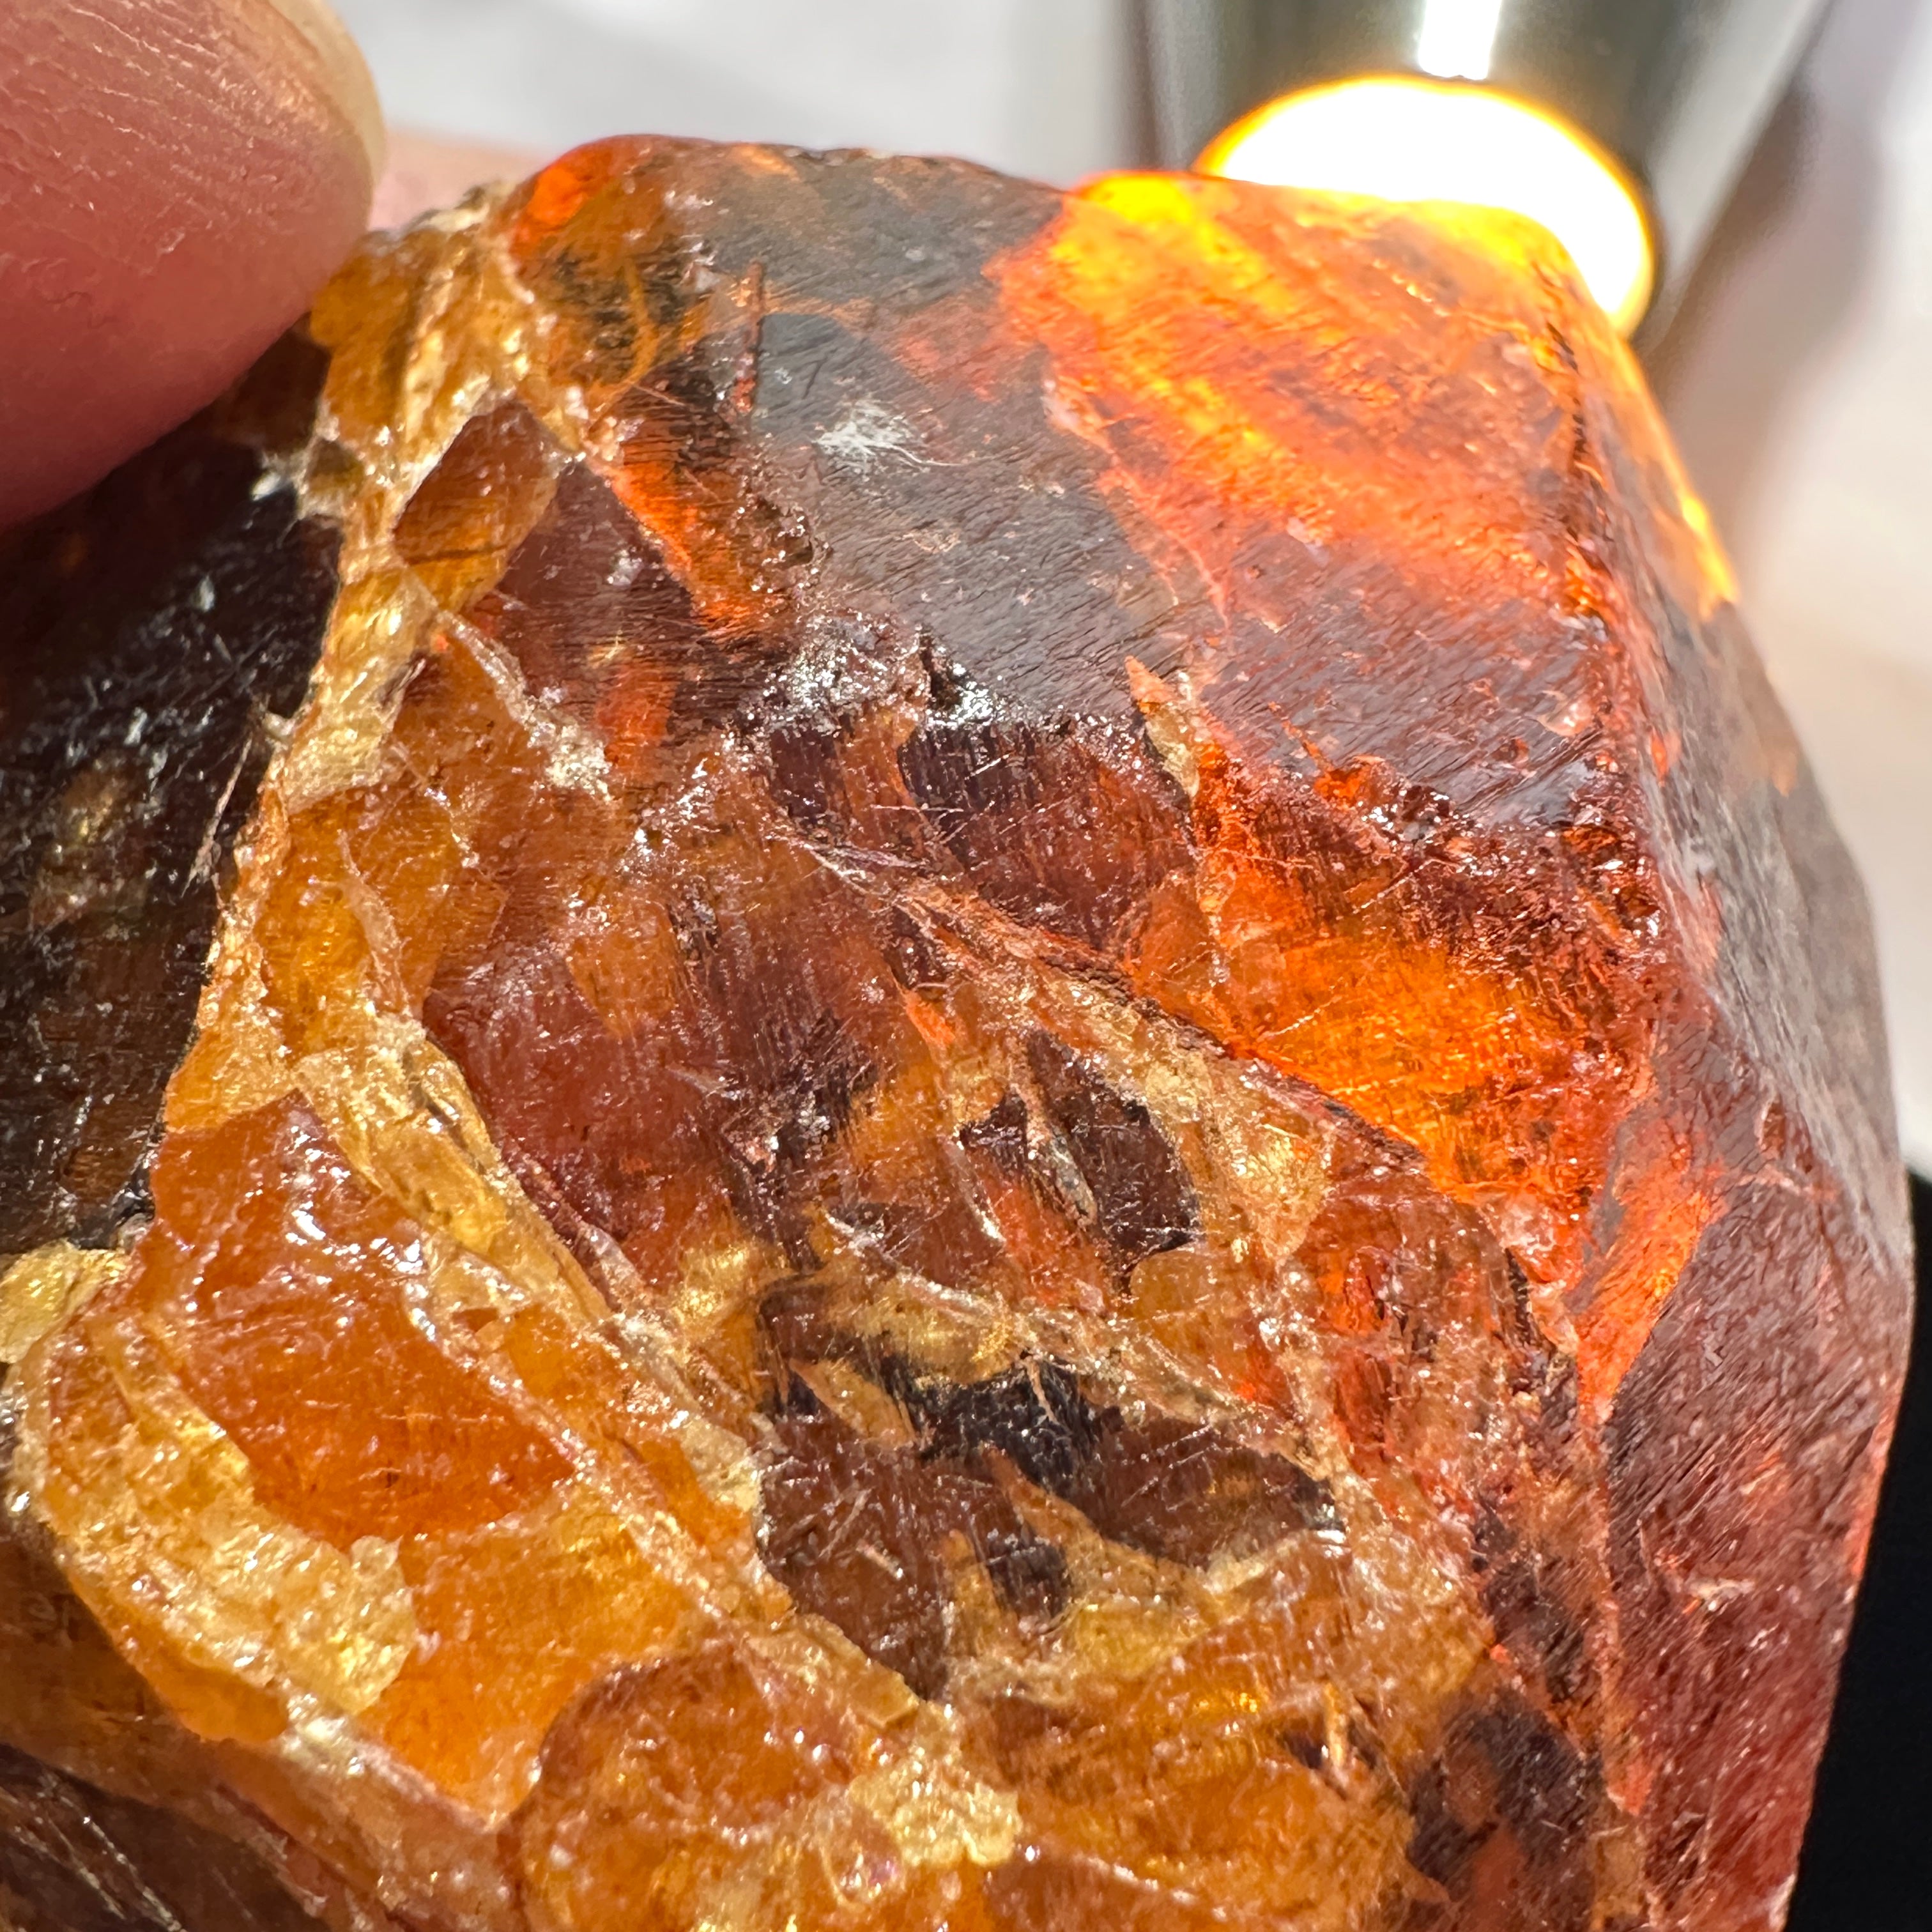 120gm / 600.00cts Large Mandarin Spessartite Garnet 41 X 38 X 38 mm, Untreated Unheated, Tanzania. Bit dark but is full of faceting grade portions see backlit photos, would normally have been broken for its faceting rough